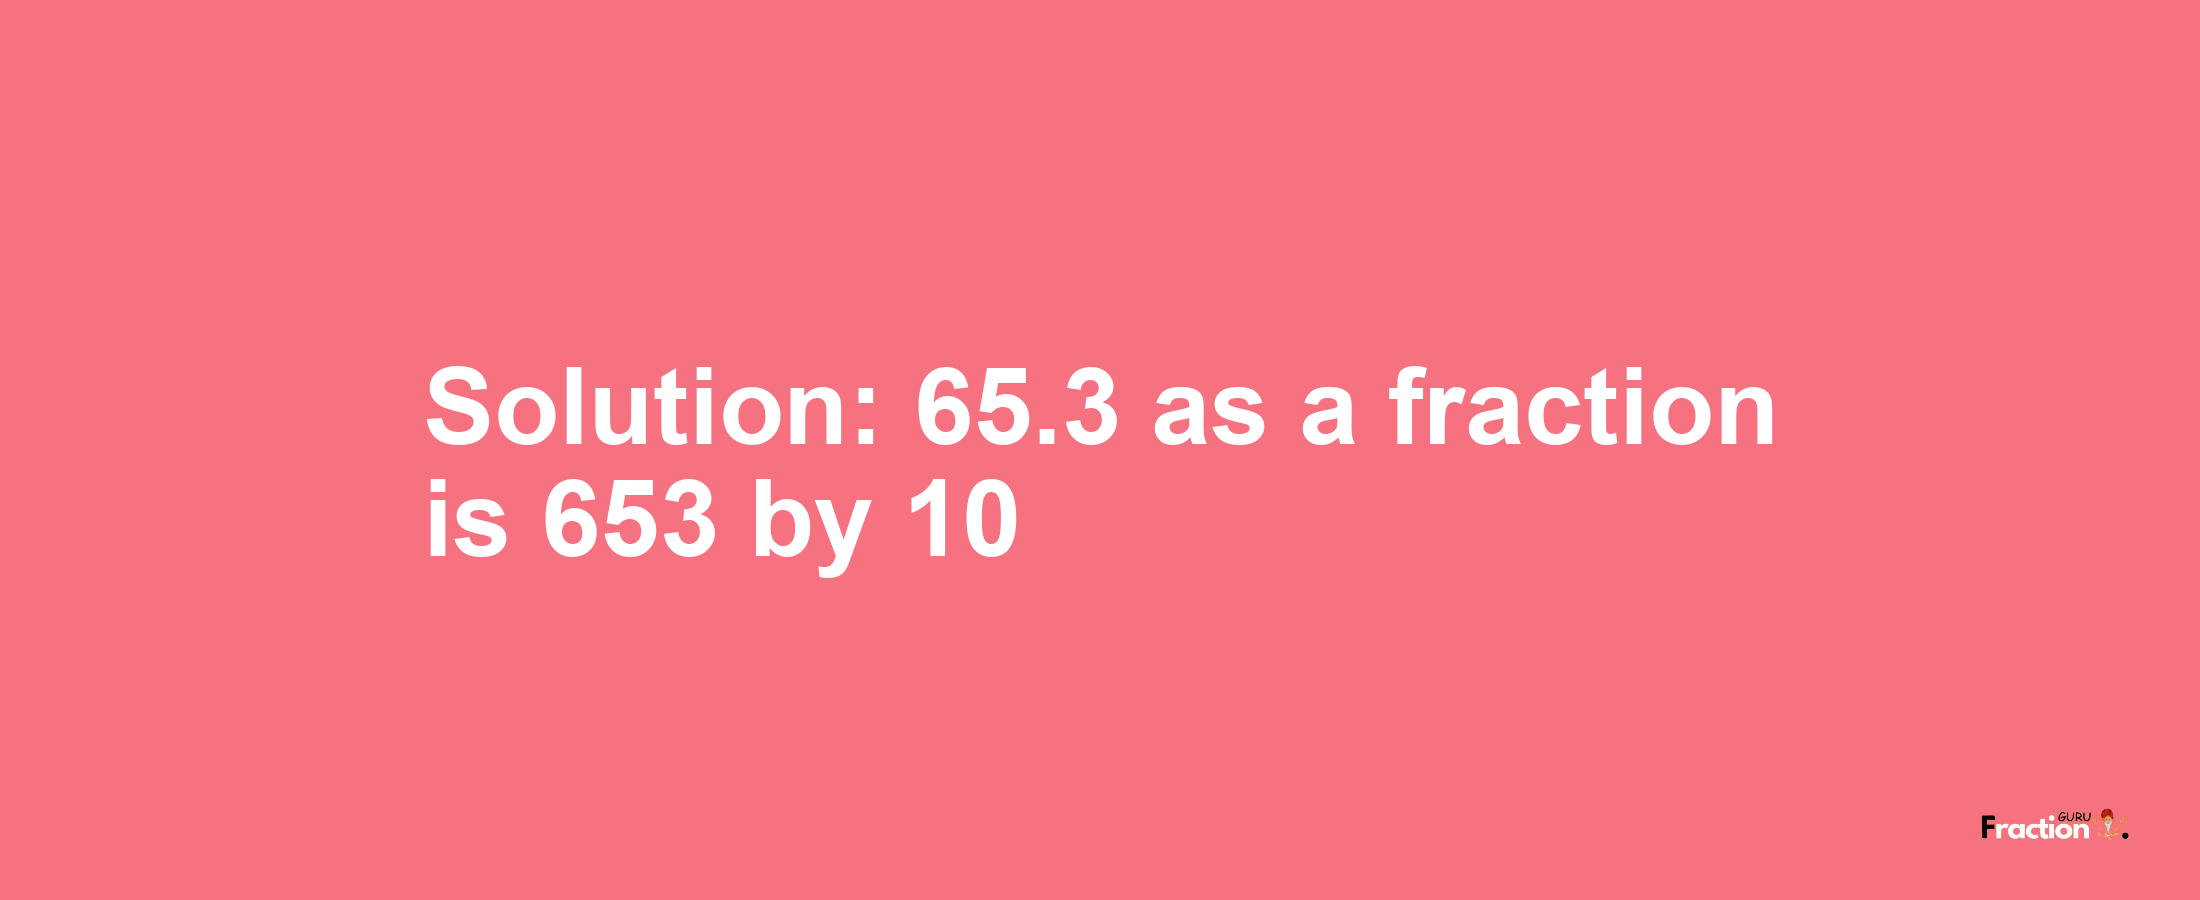 Solution:65.3 as a fraction is 653/10